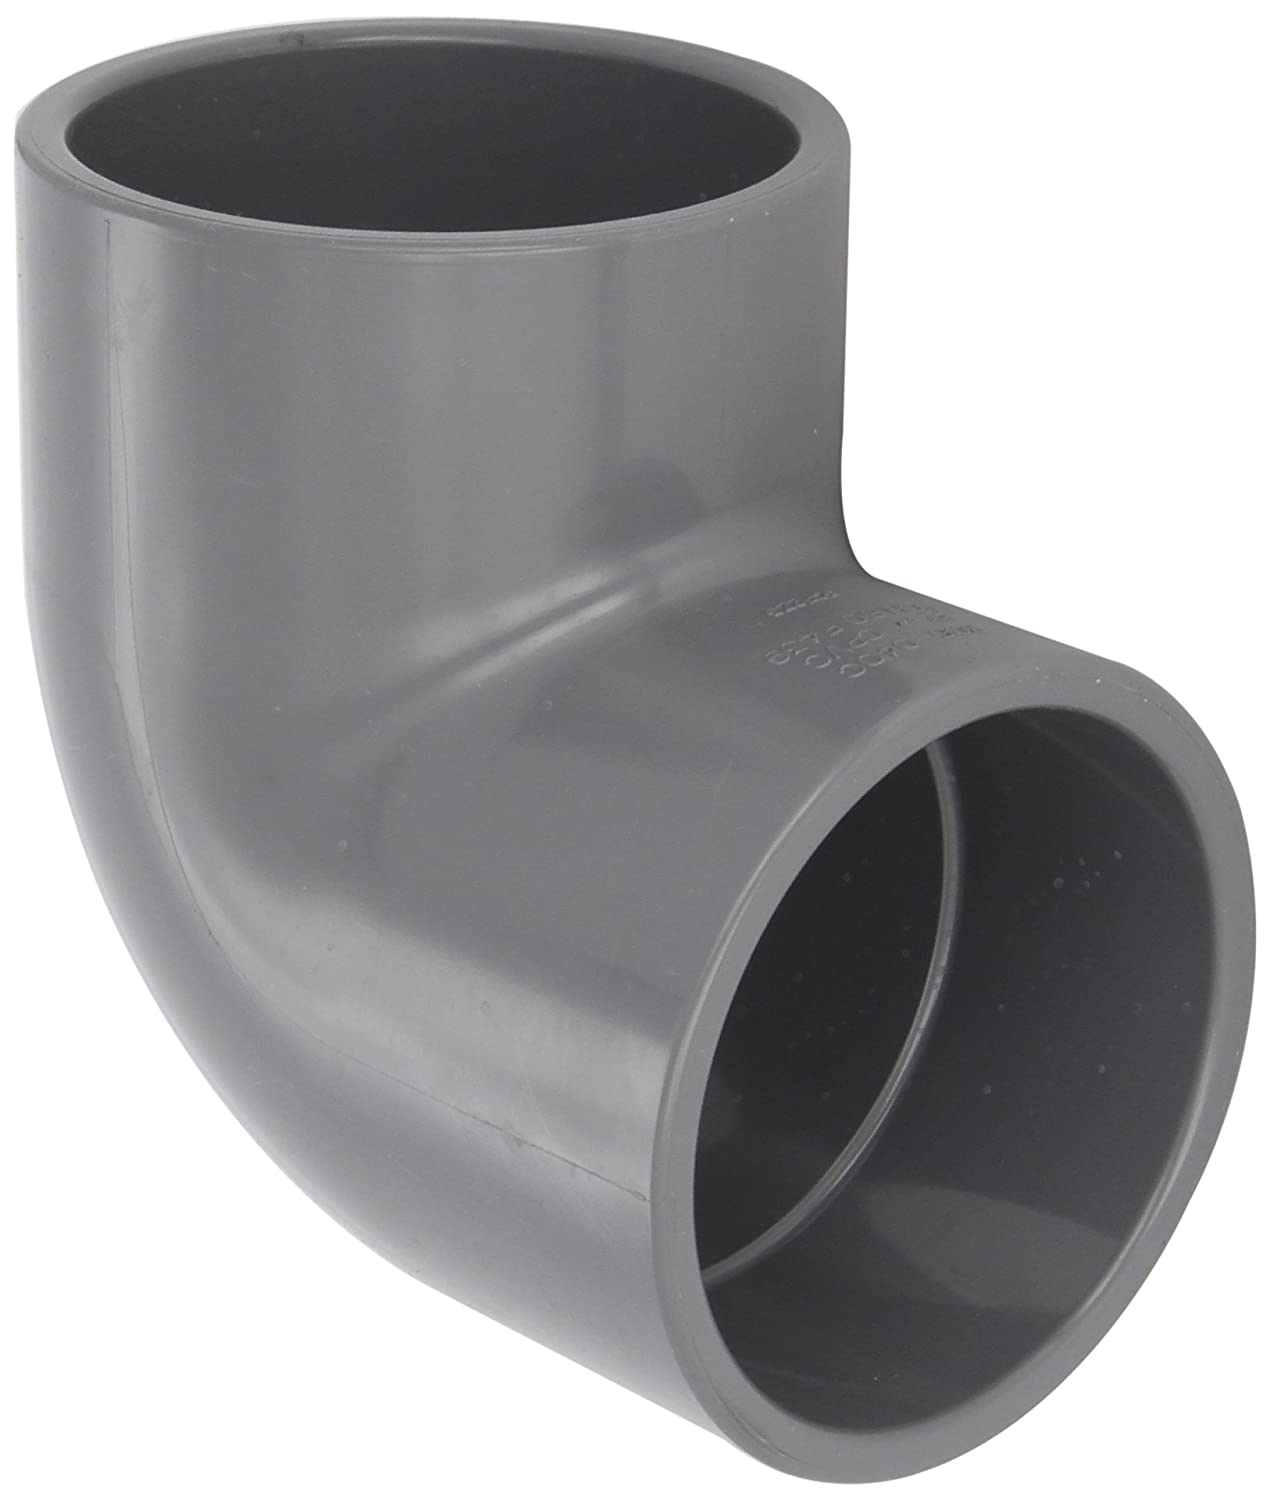 Spears 806-060C - CPVC Pipe Fitting, 90 Degree Elbow, Schedule 80, 6" Socket